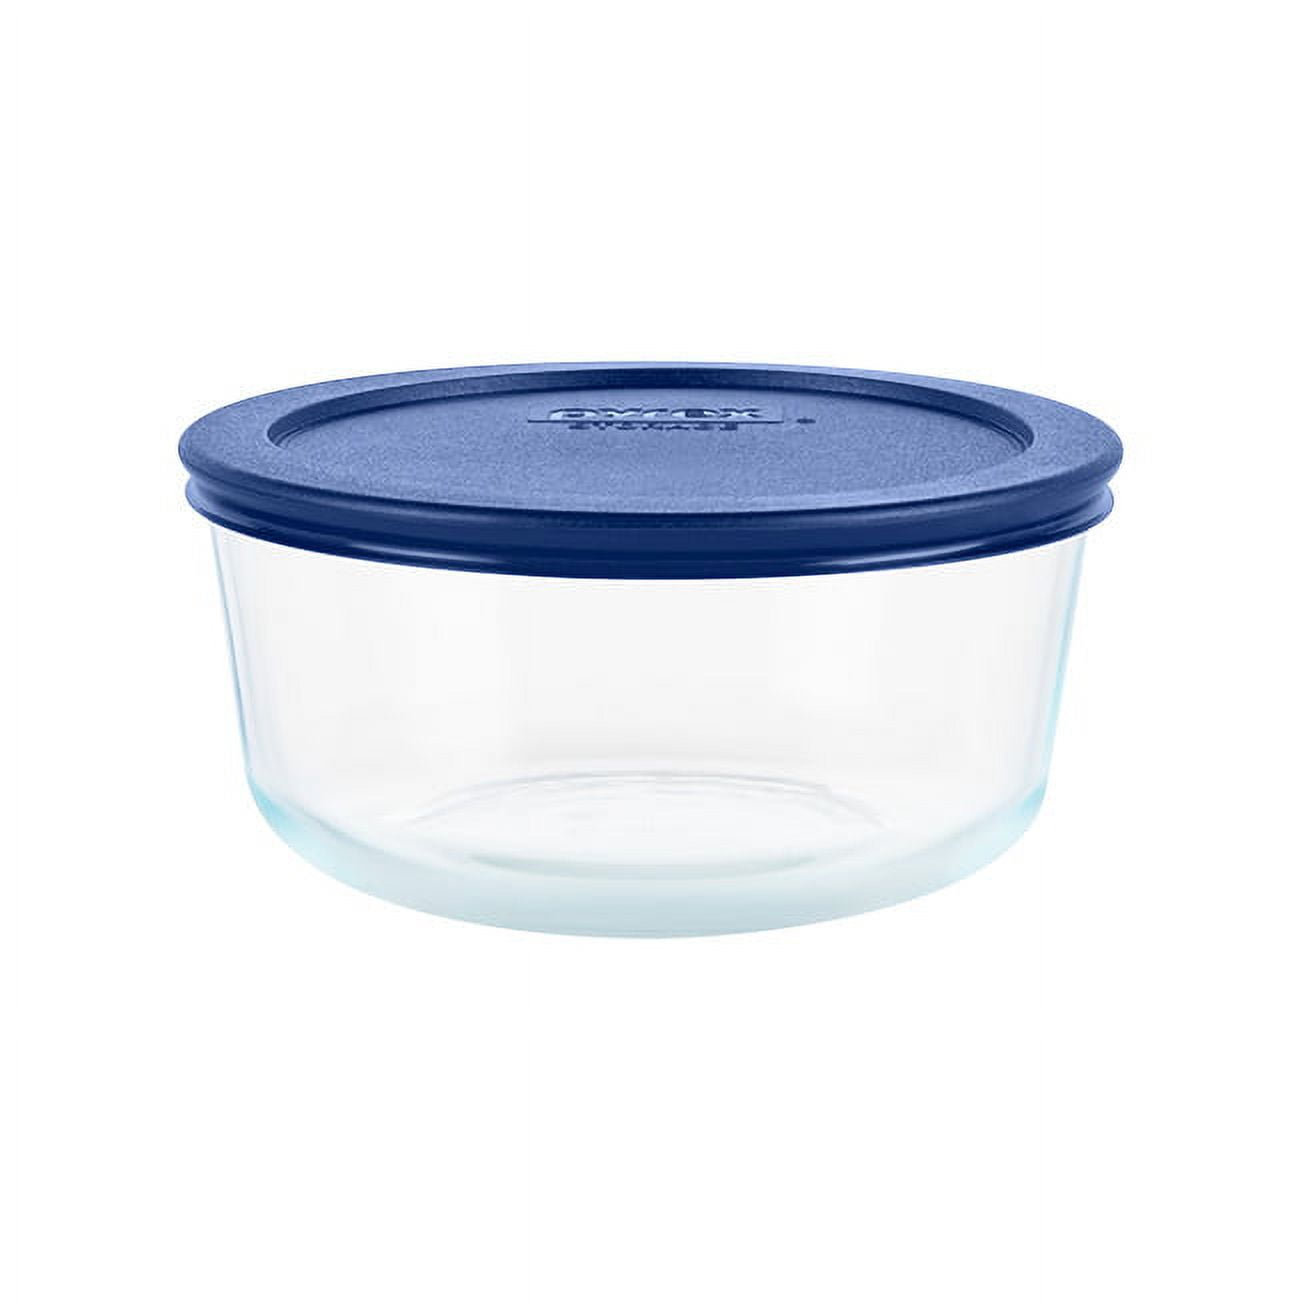 Pyrex Simply Store 6-Pc Glass Food Storage Set with BPA-Free Lids, 7-Cup to  2-Cup Round Containers, Dishwasher, Microwave & Freezer Safe, Blue